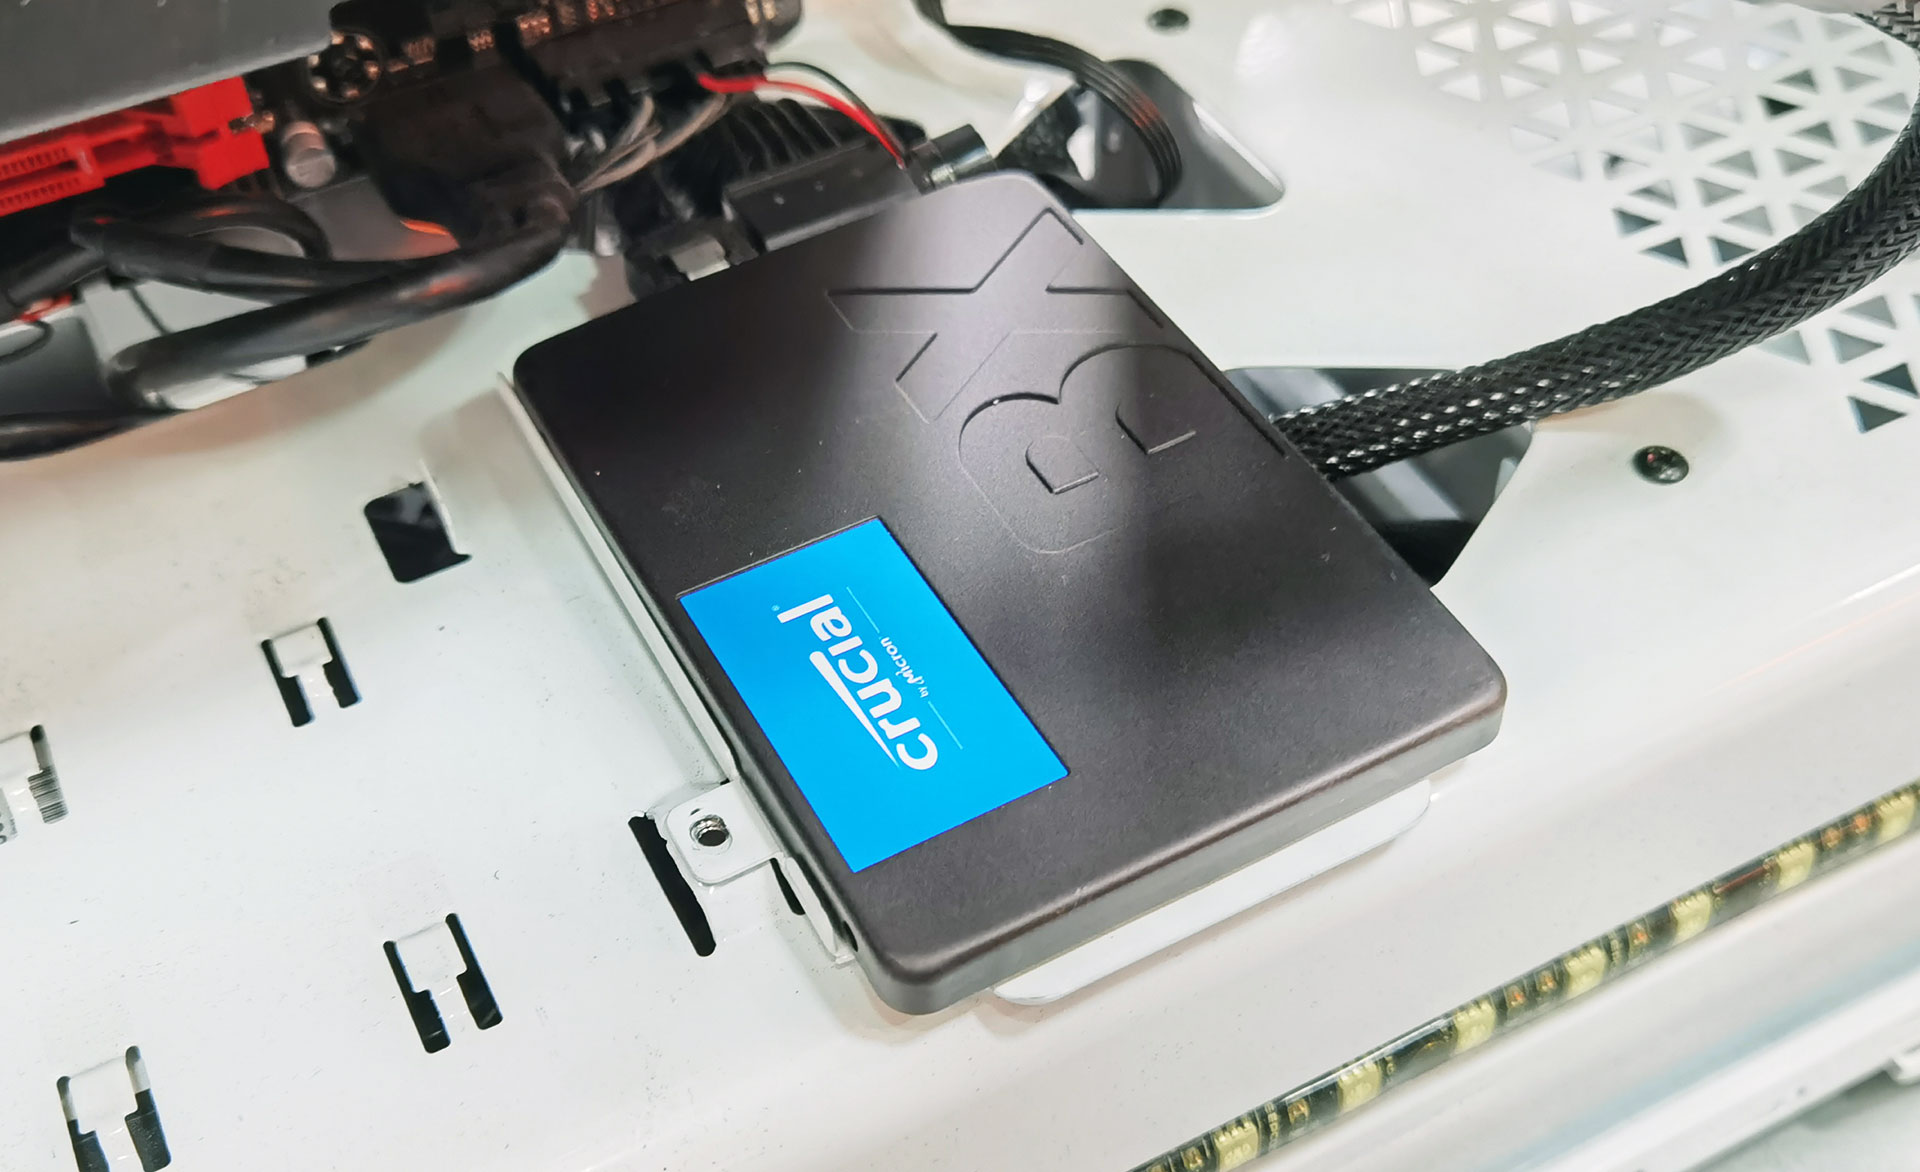 Crucial BX500 1TB Review: Low-Cost SSD as a Storage instead of HDD